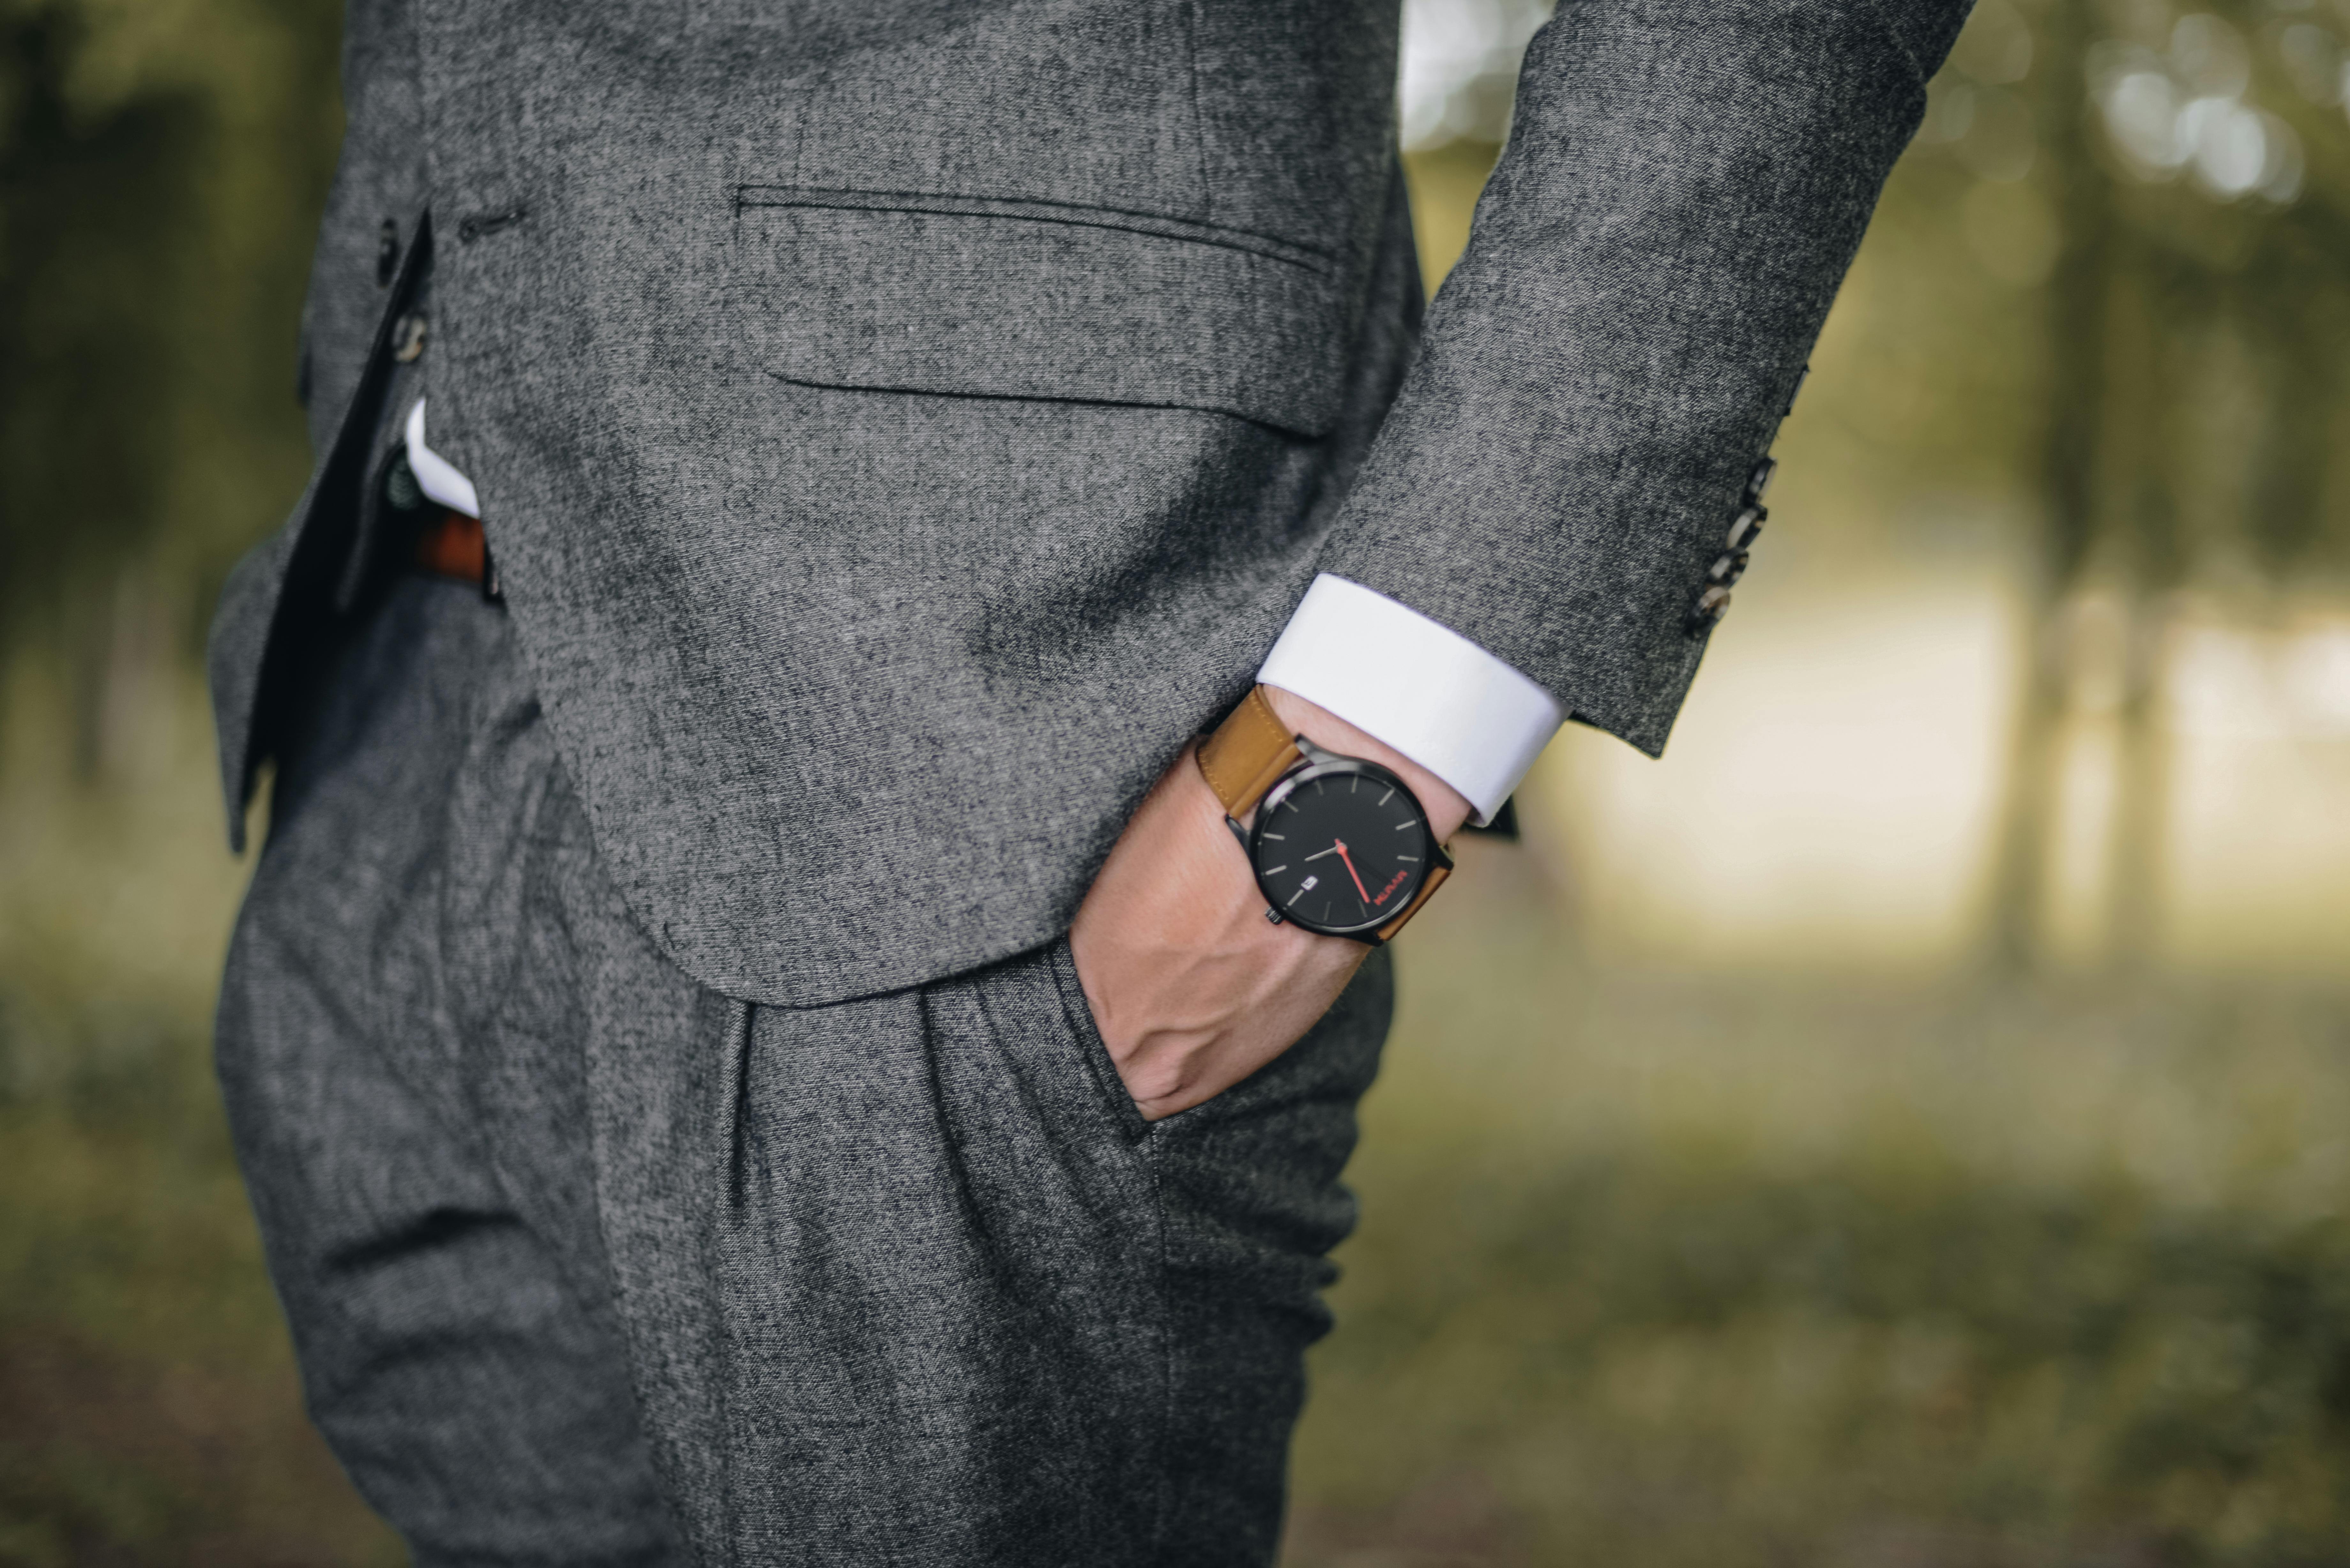 Free Man Wearing Watch With Hand on Pocket Stock Photo